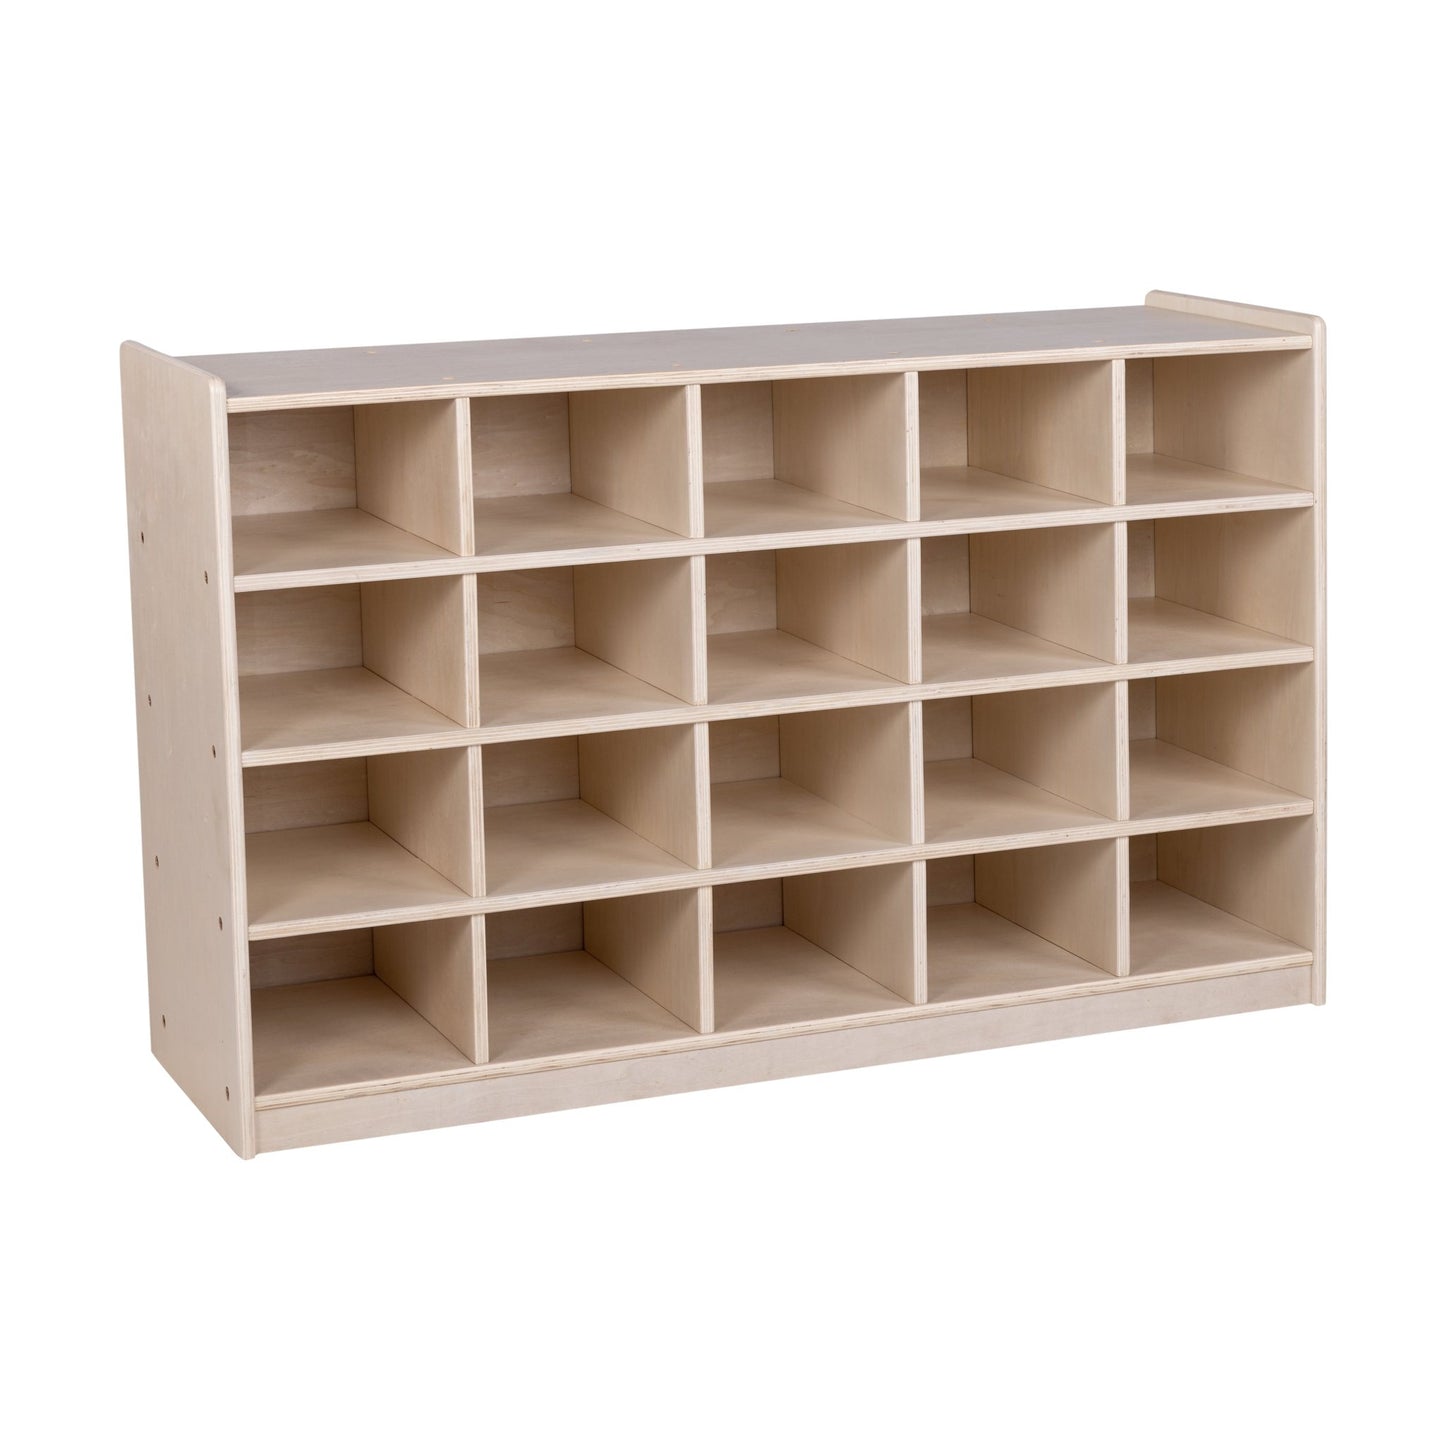 Angeles Birch Mobile 20-Section Cubby Storage (AG1012) - SchoolOutlet